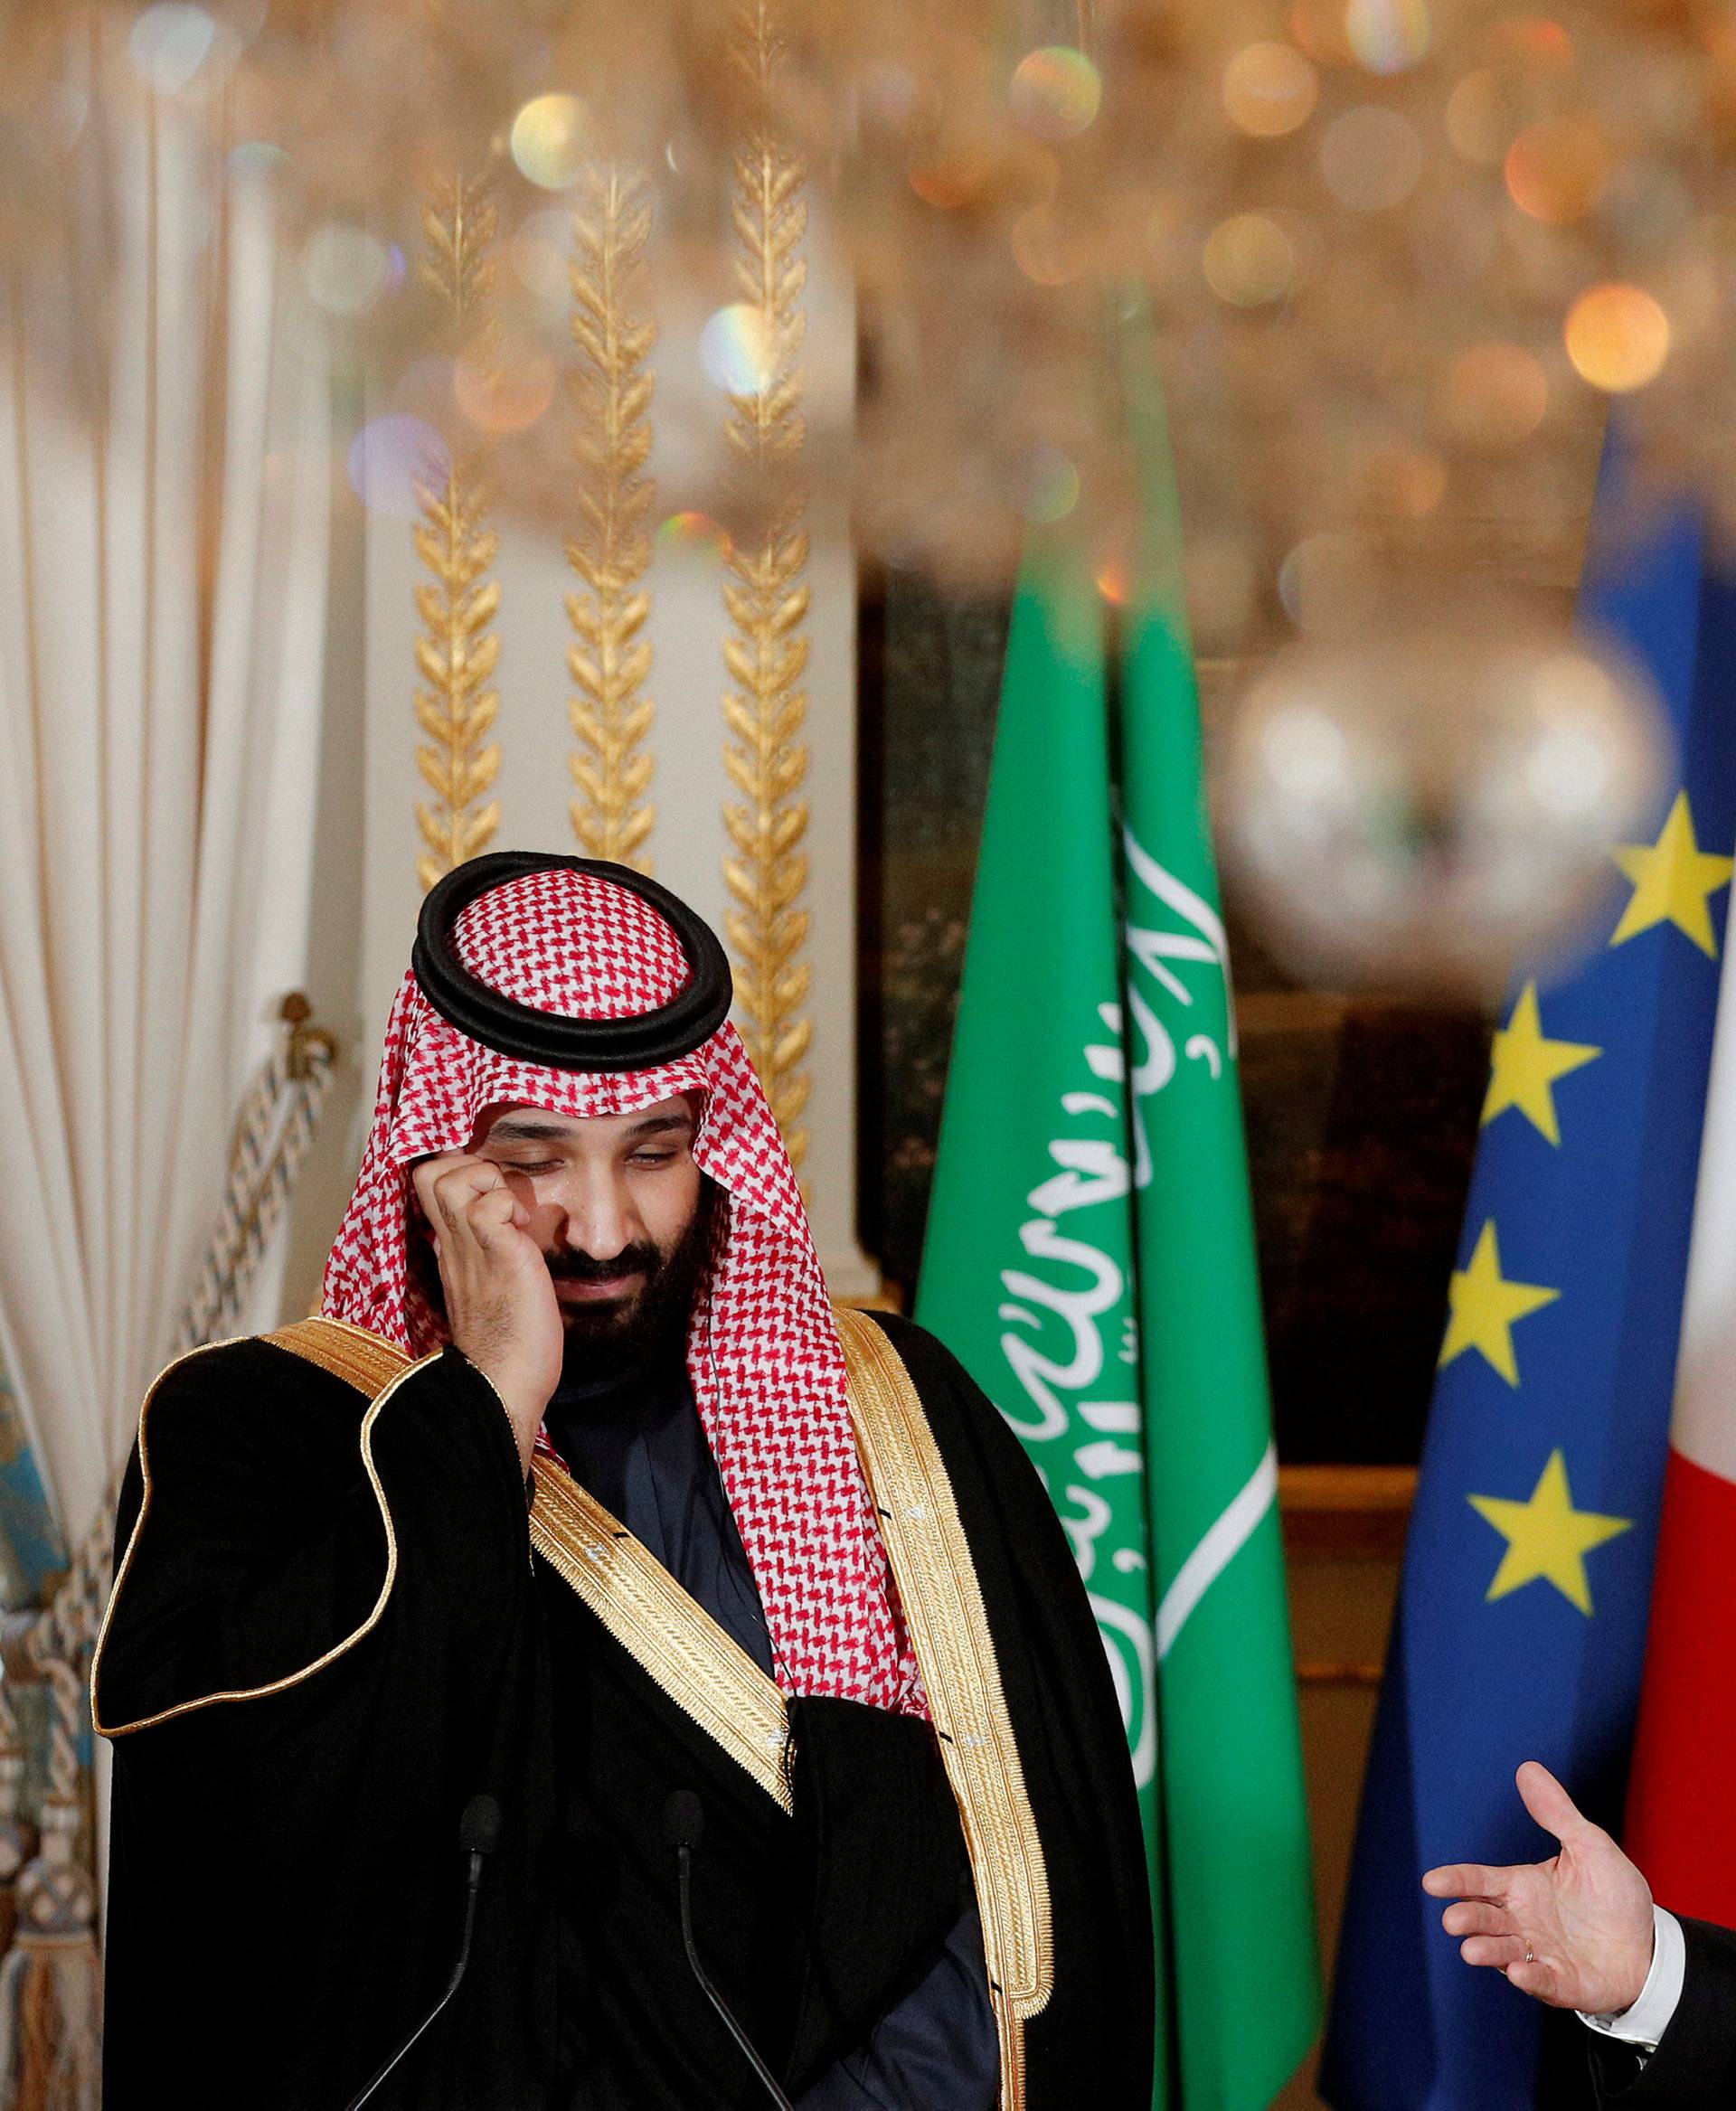 French President Emmanuel Macron and Saudi Arabia's Crown Prince Mohammed bin Salman attend a press conference at the Elysee Palace in Paris